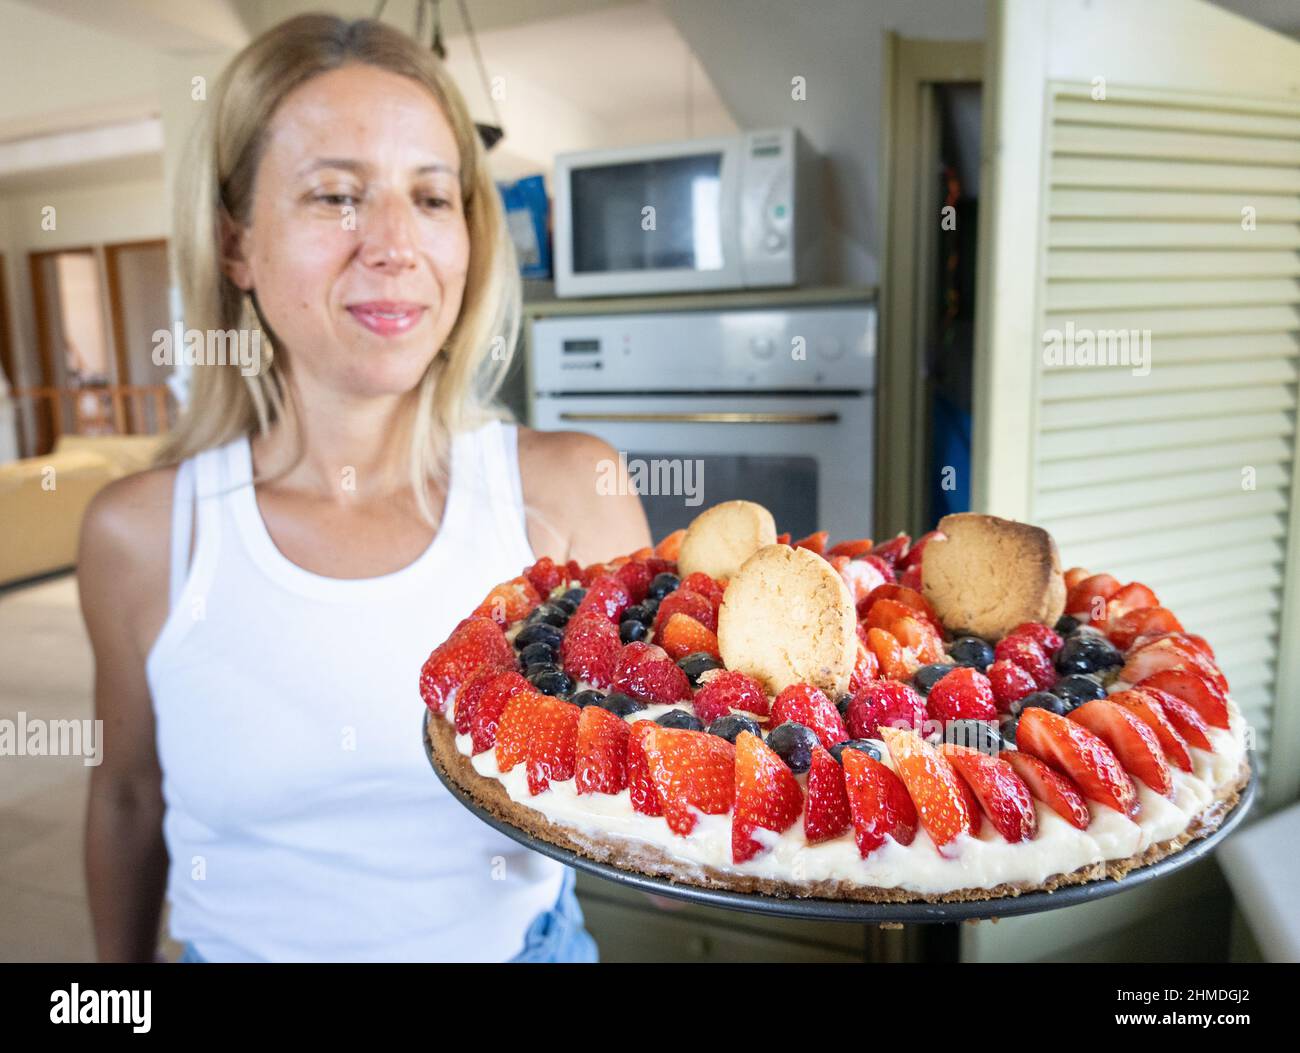 Beautiful woman holding tart garnished with whipped cream, fresh berries and cookies in kitchen Stock Photo